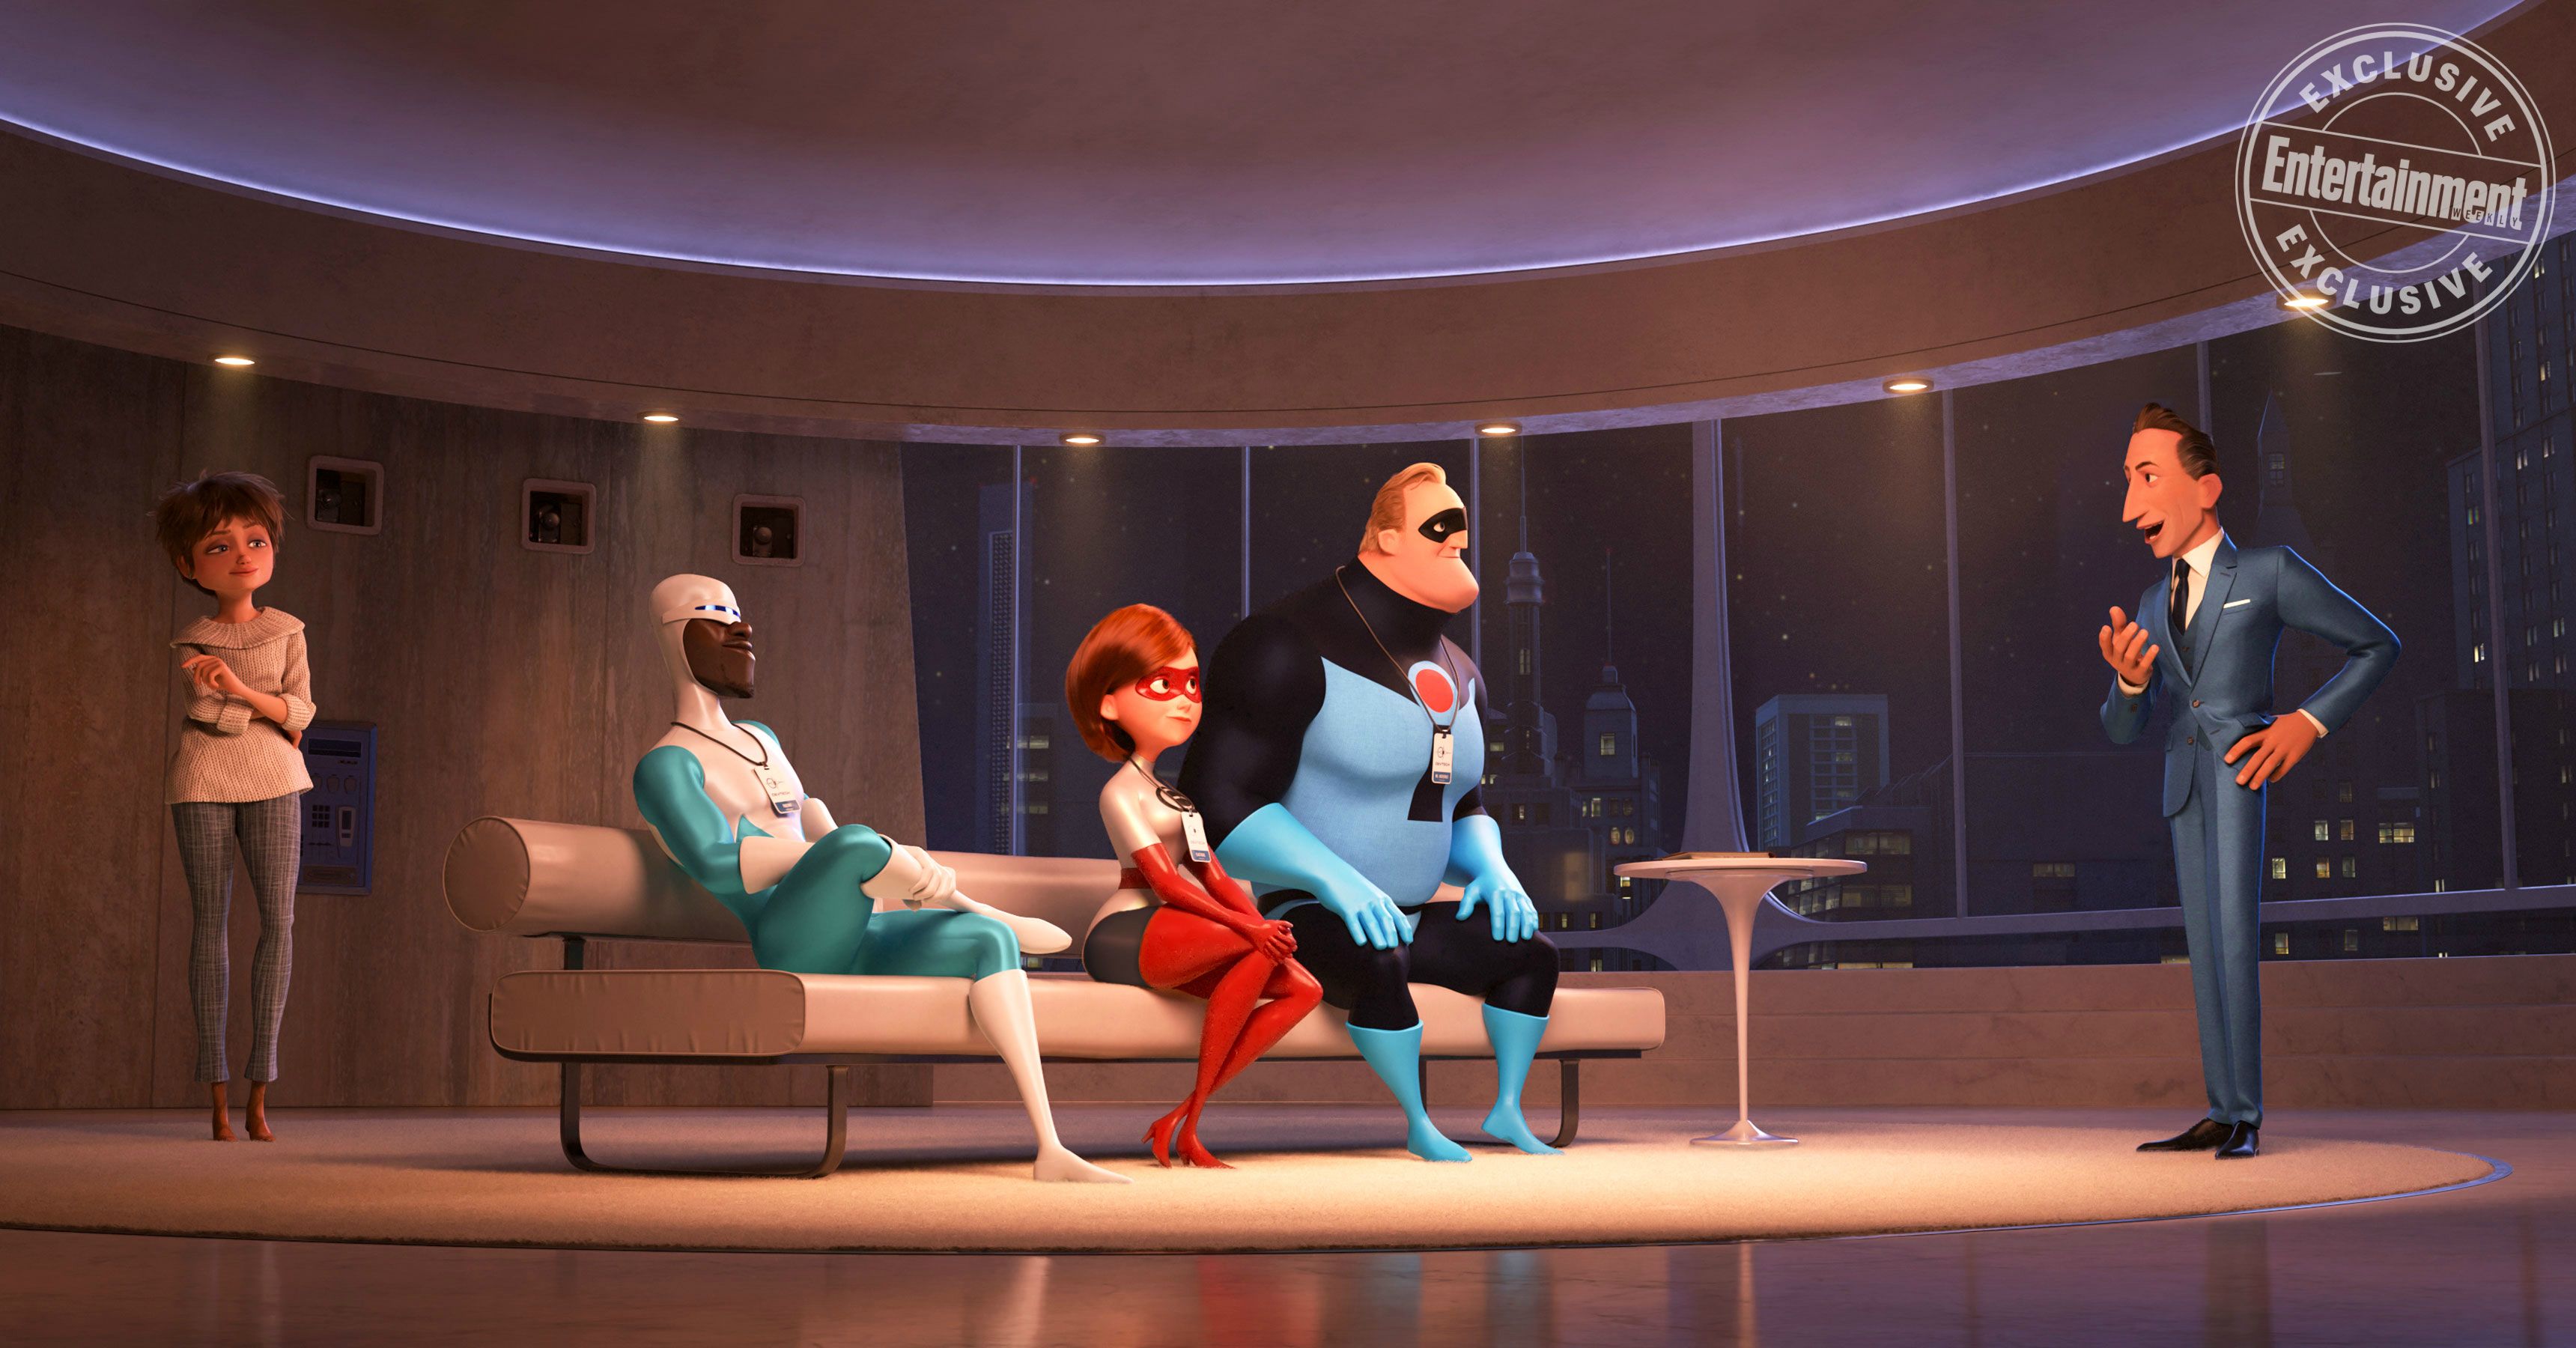 Frozone hangs out with other supers in incredibles 2